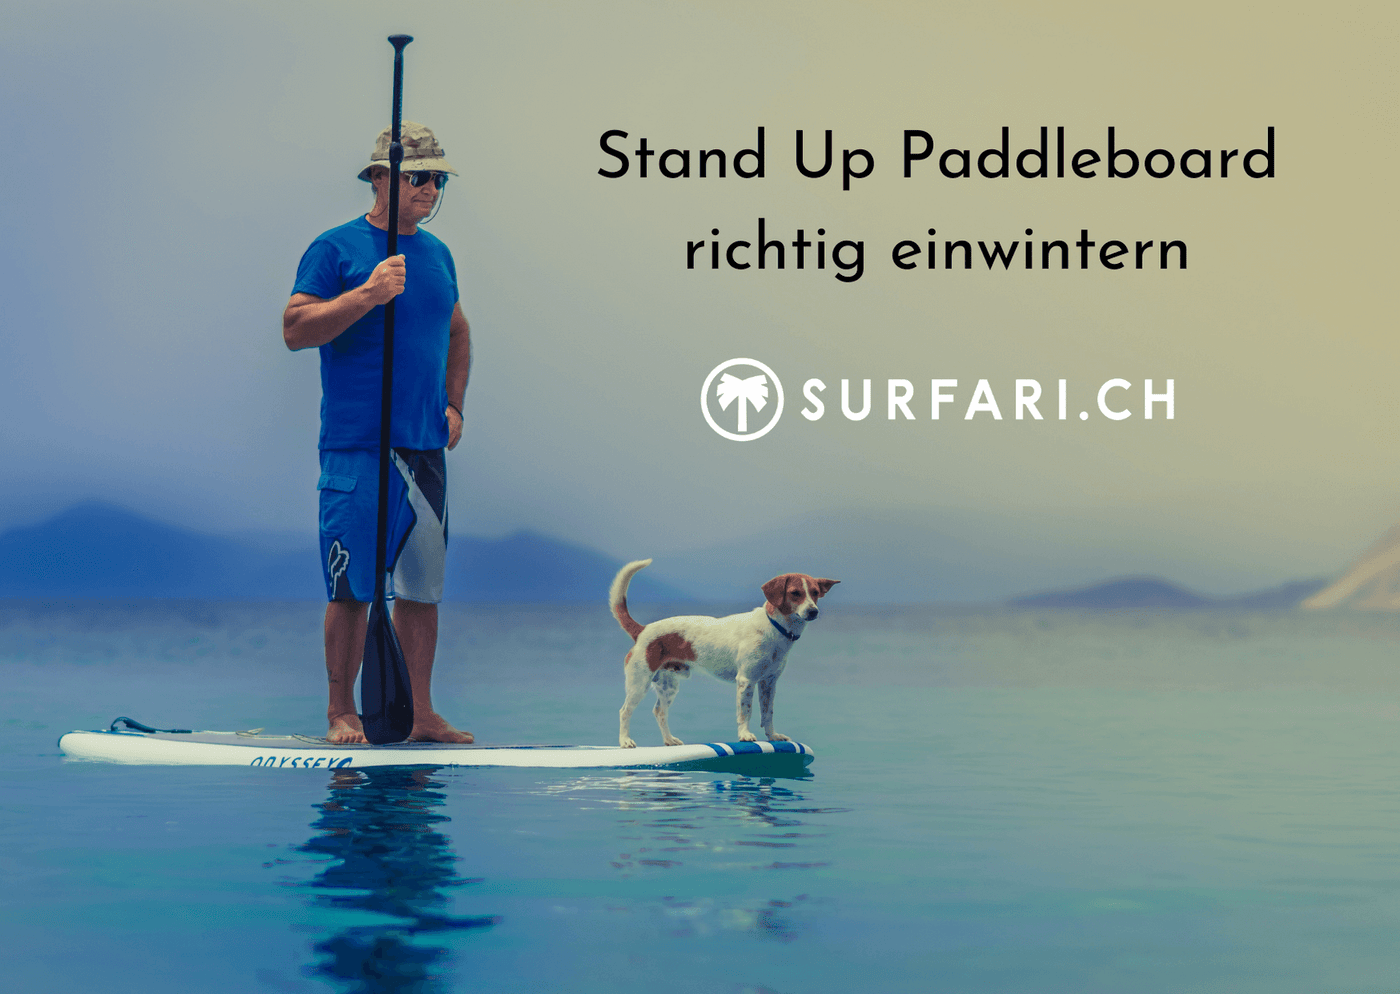 How to: SUP/Stand Up Paddle Board richtig einwintern